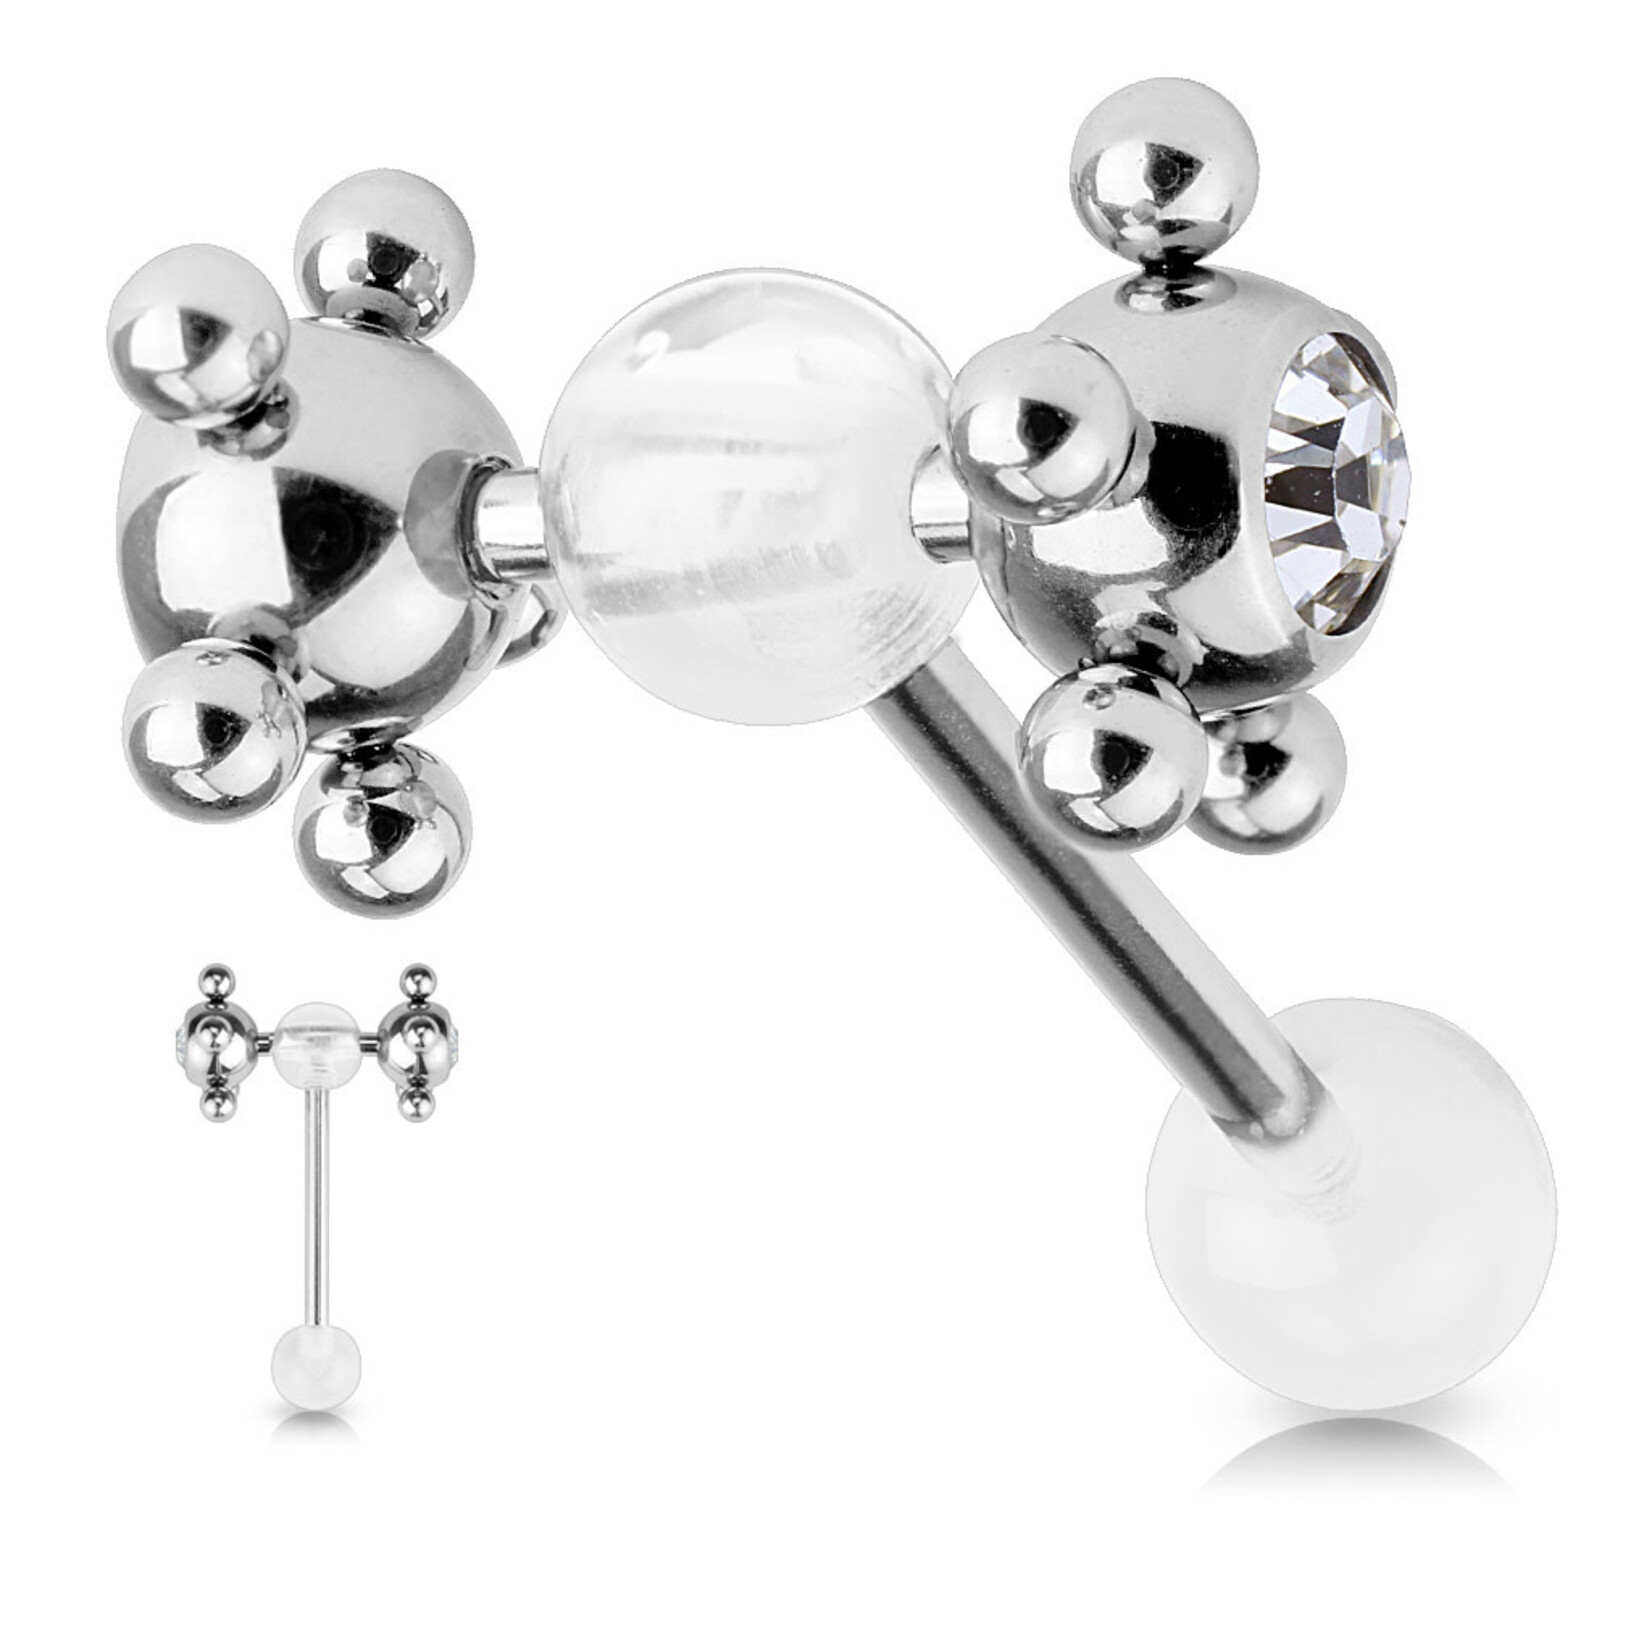 Hollywood Body Jewelry Crystal Fidget Surgical Steel/Acrylic Tongue Ring